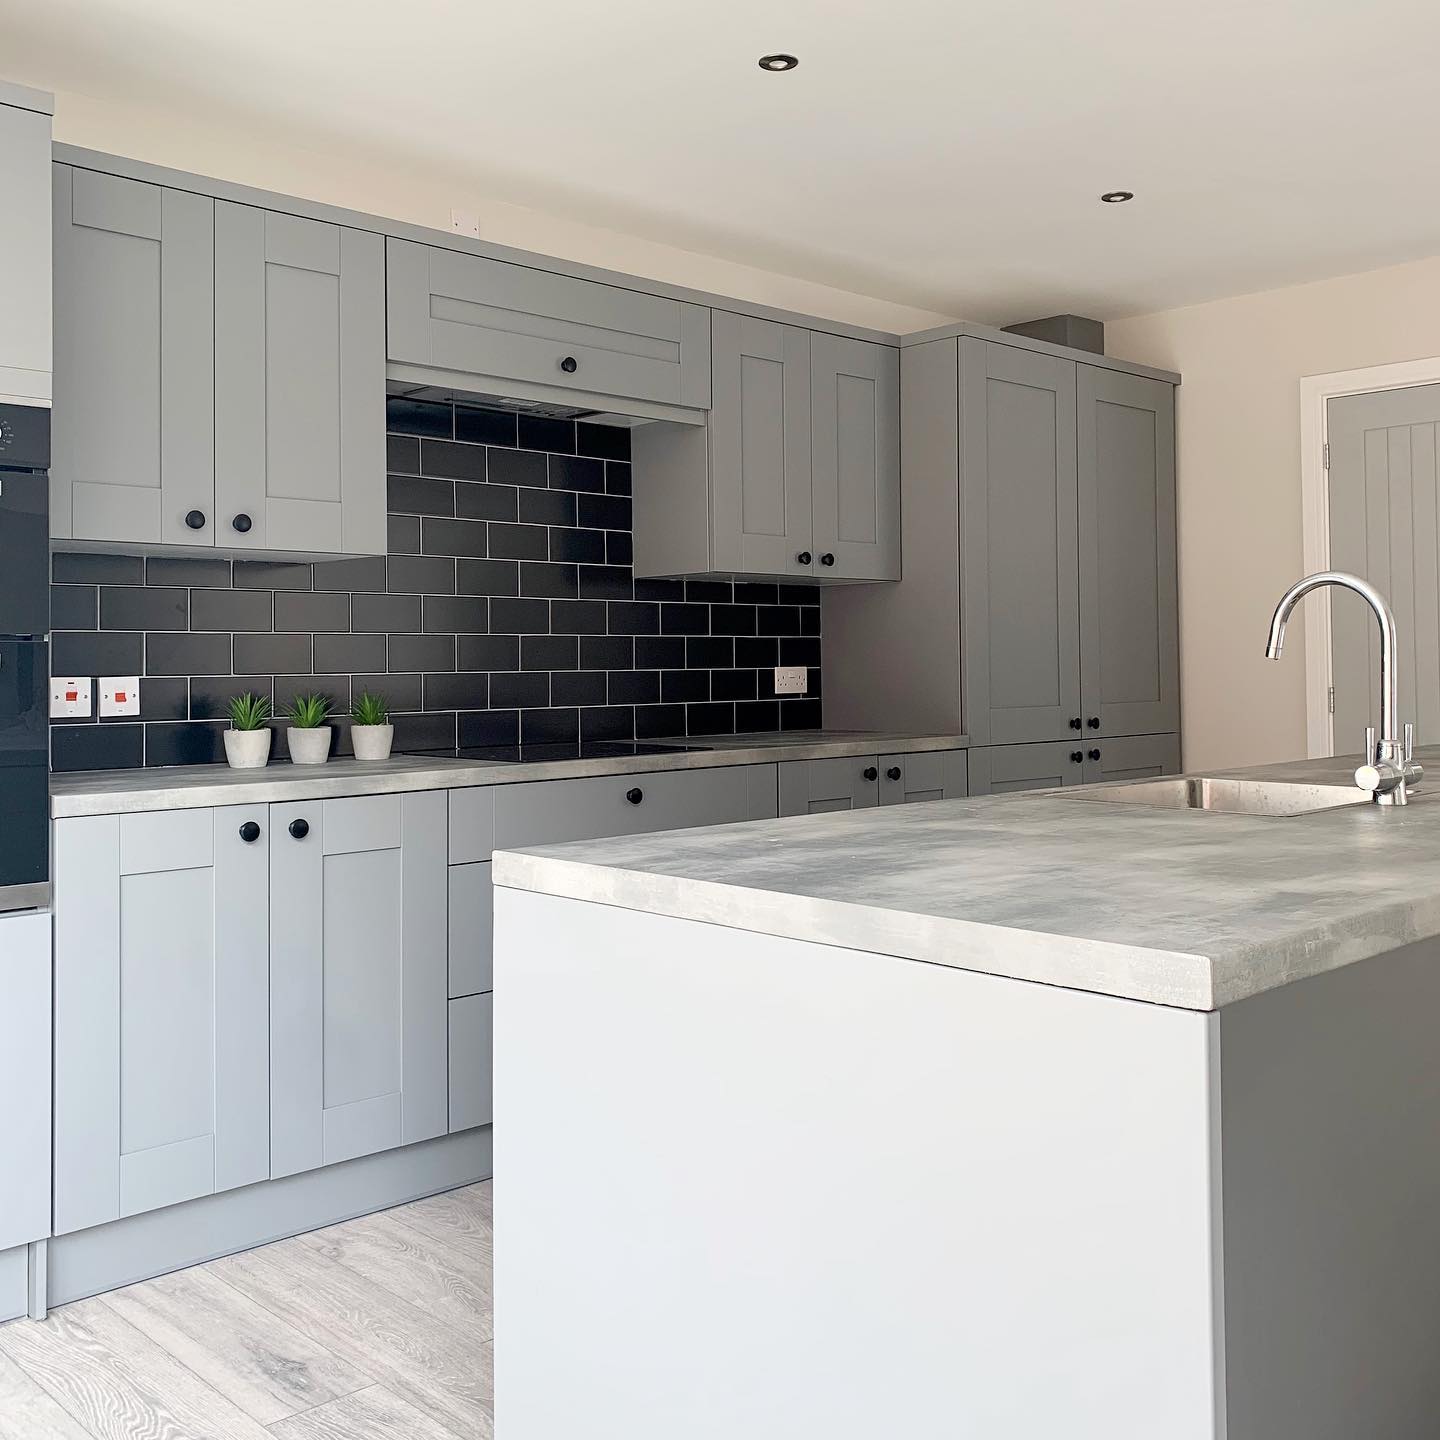 Charworth Homes - Grey Kitchen with statement tiles in black